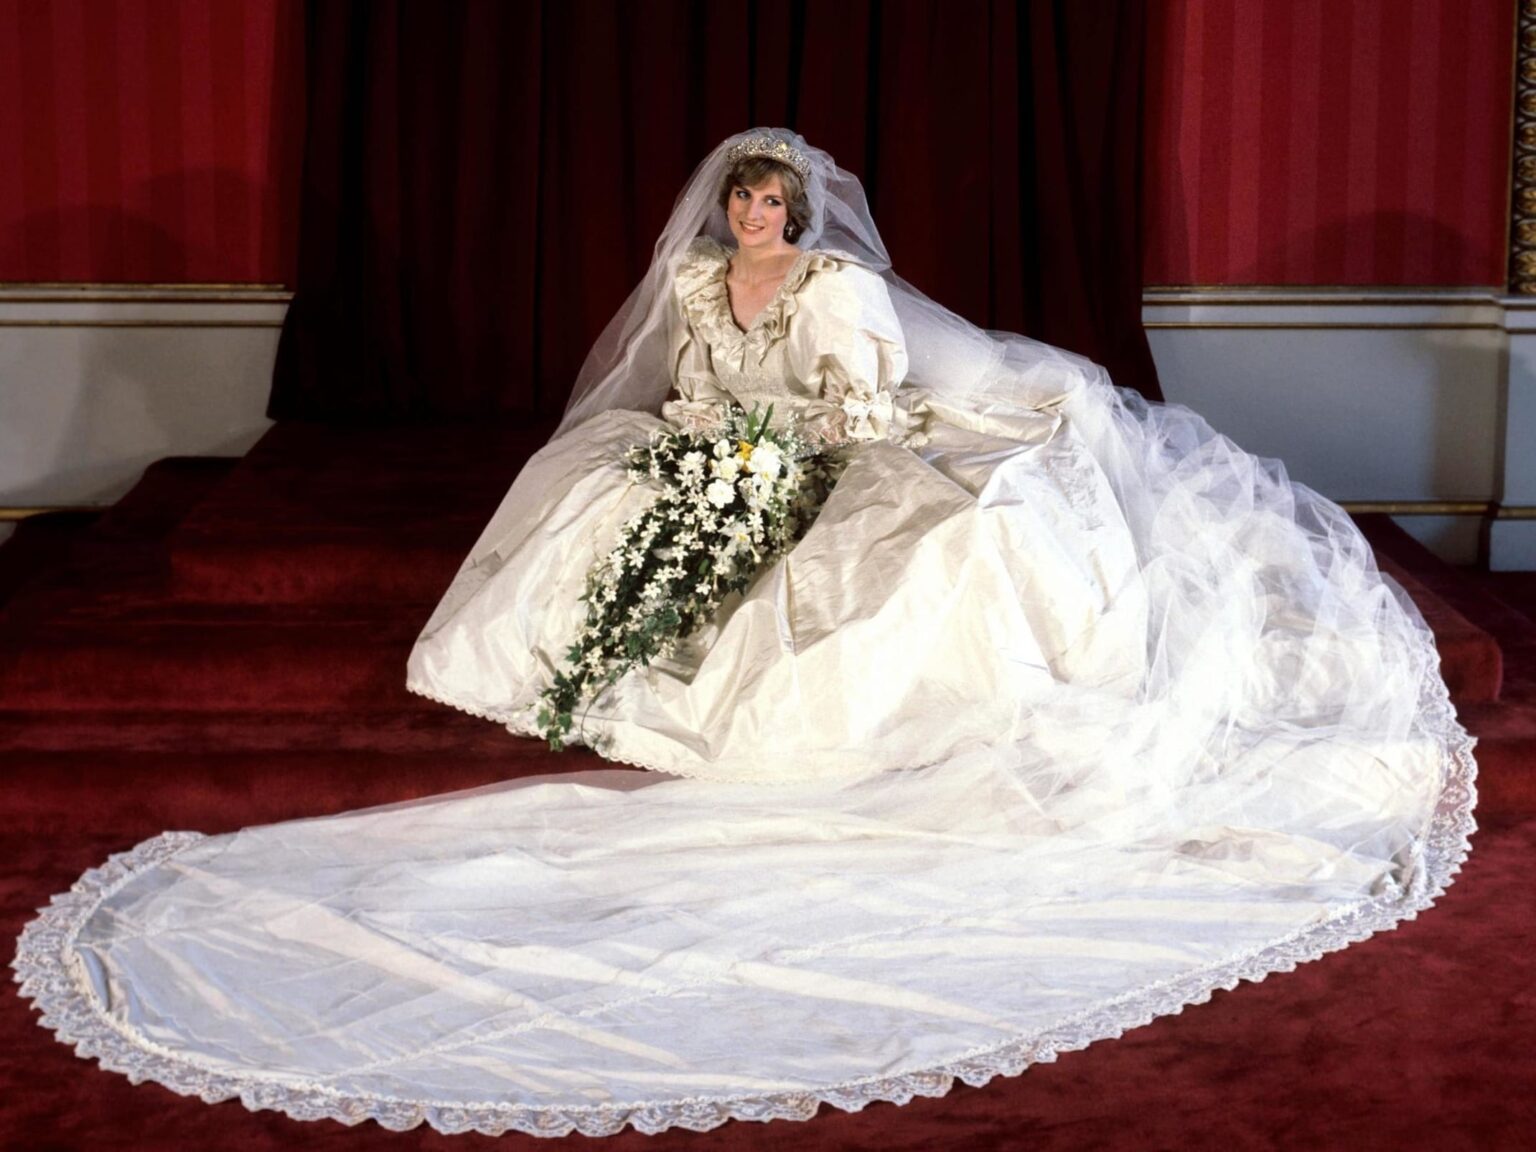 From Queen Victoria to Meghan Markle, take a look at the most iconic royal wedding dresses. Which dress is your fave? Let us know!